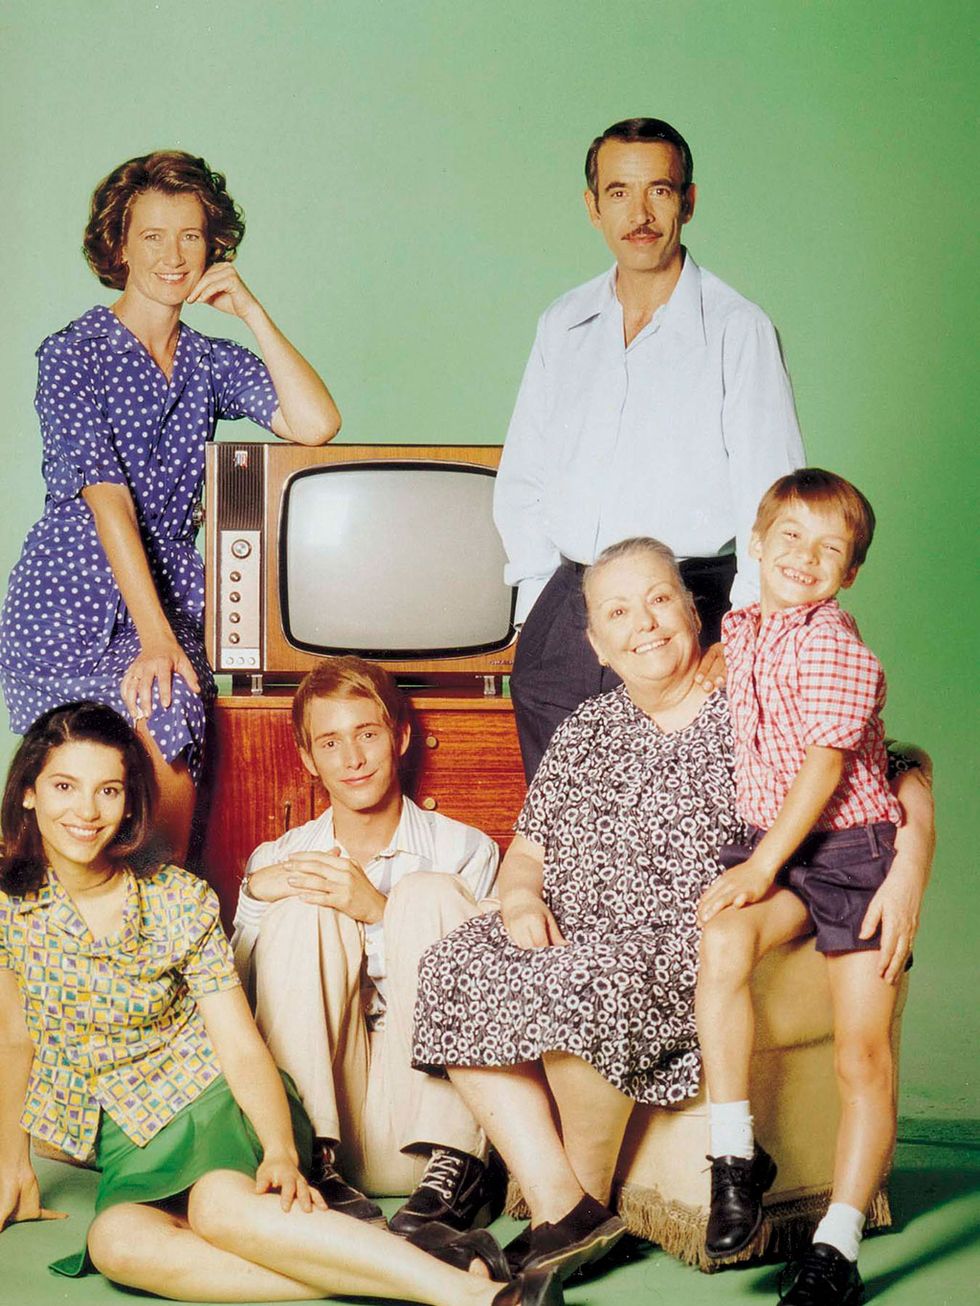 Hair, Face, People, Shirt, Dress, Family pictures, Vintage clothing, Television, Lap, Analog television, 